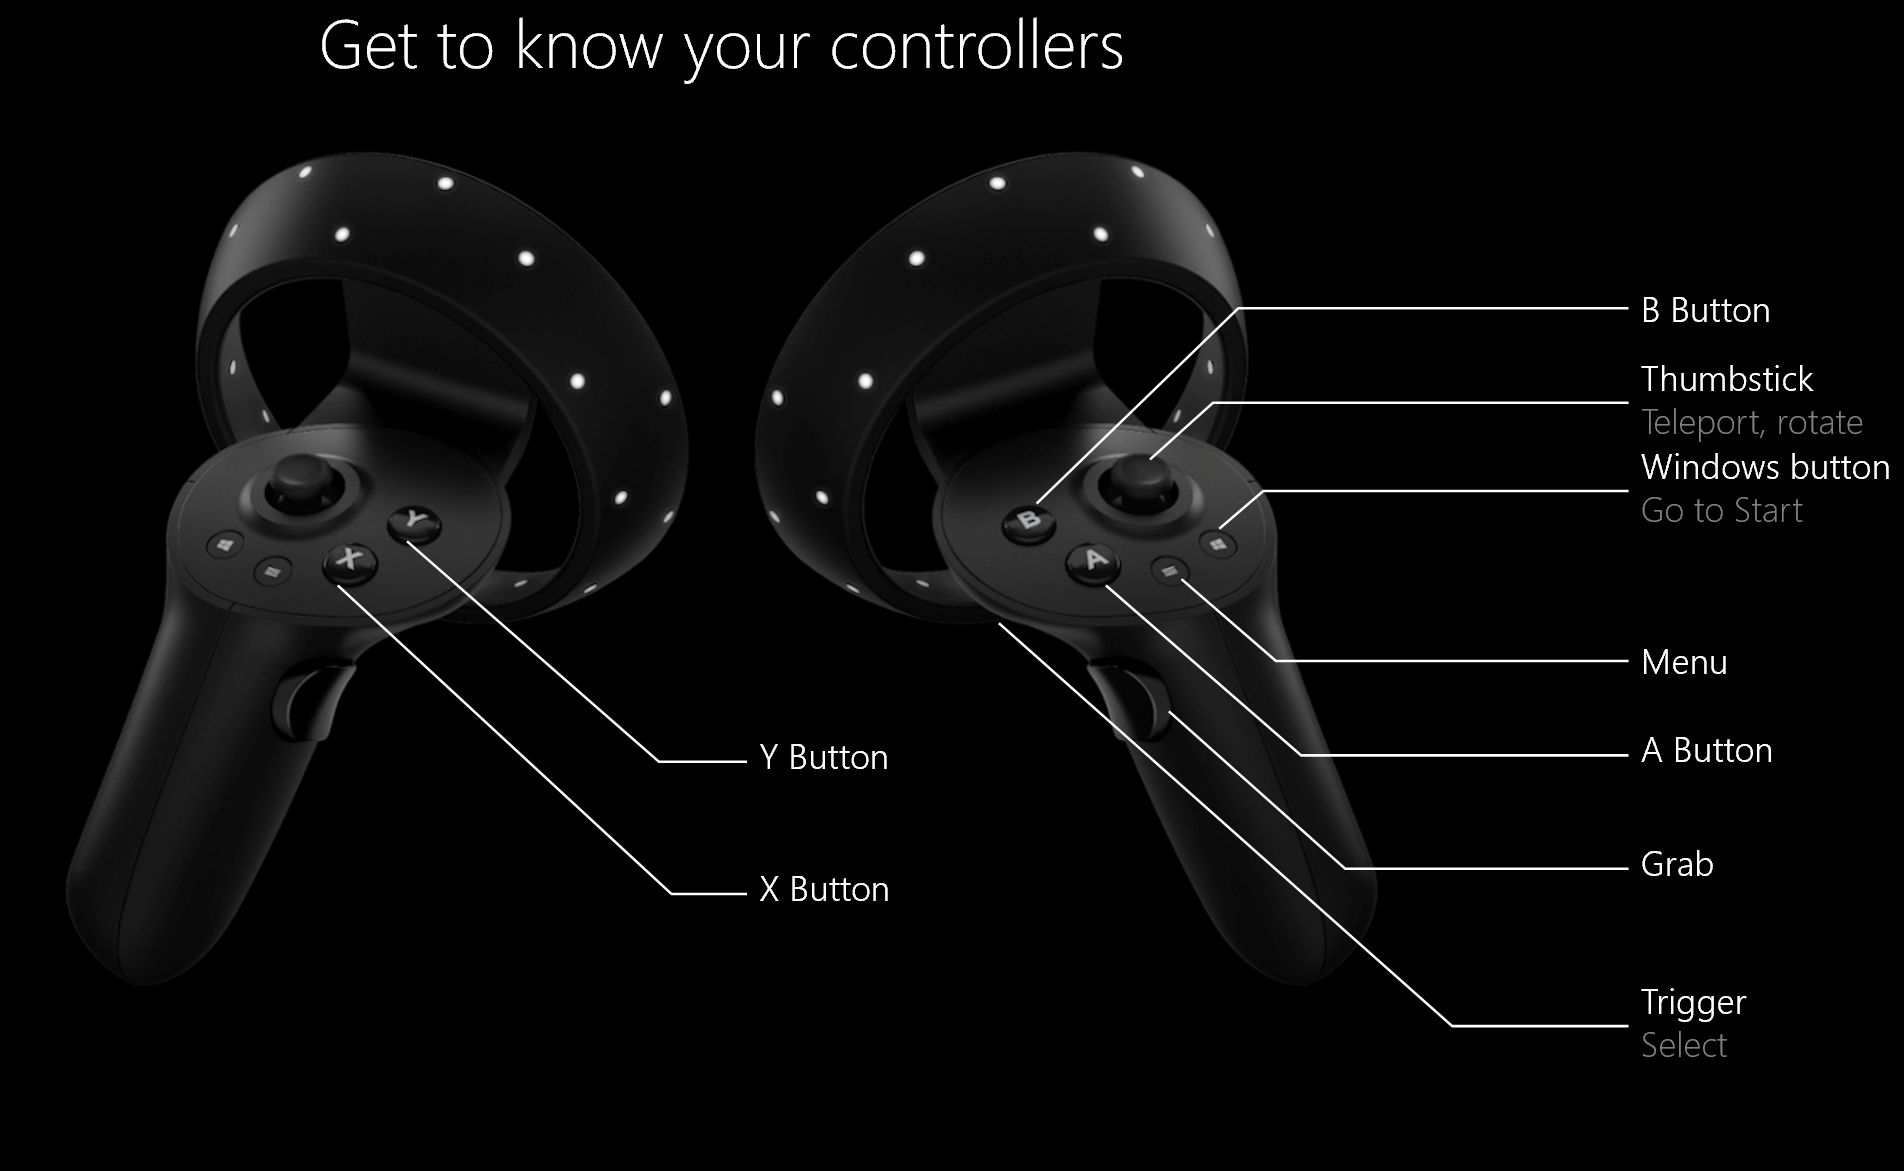 Get familiar with your motion controllers